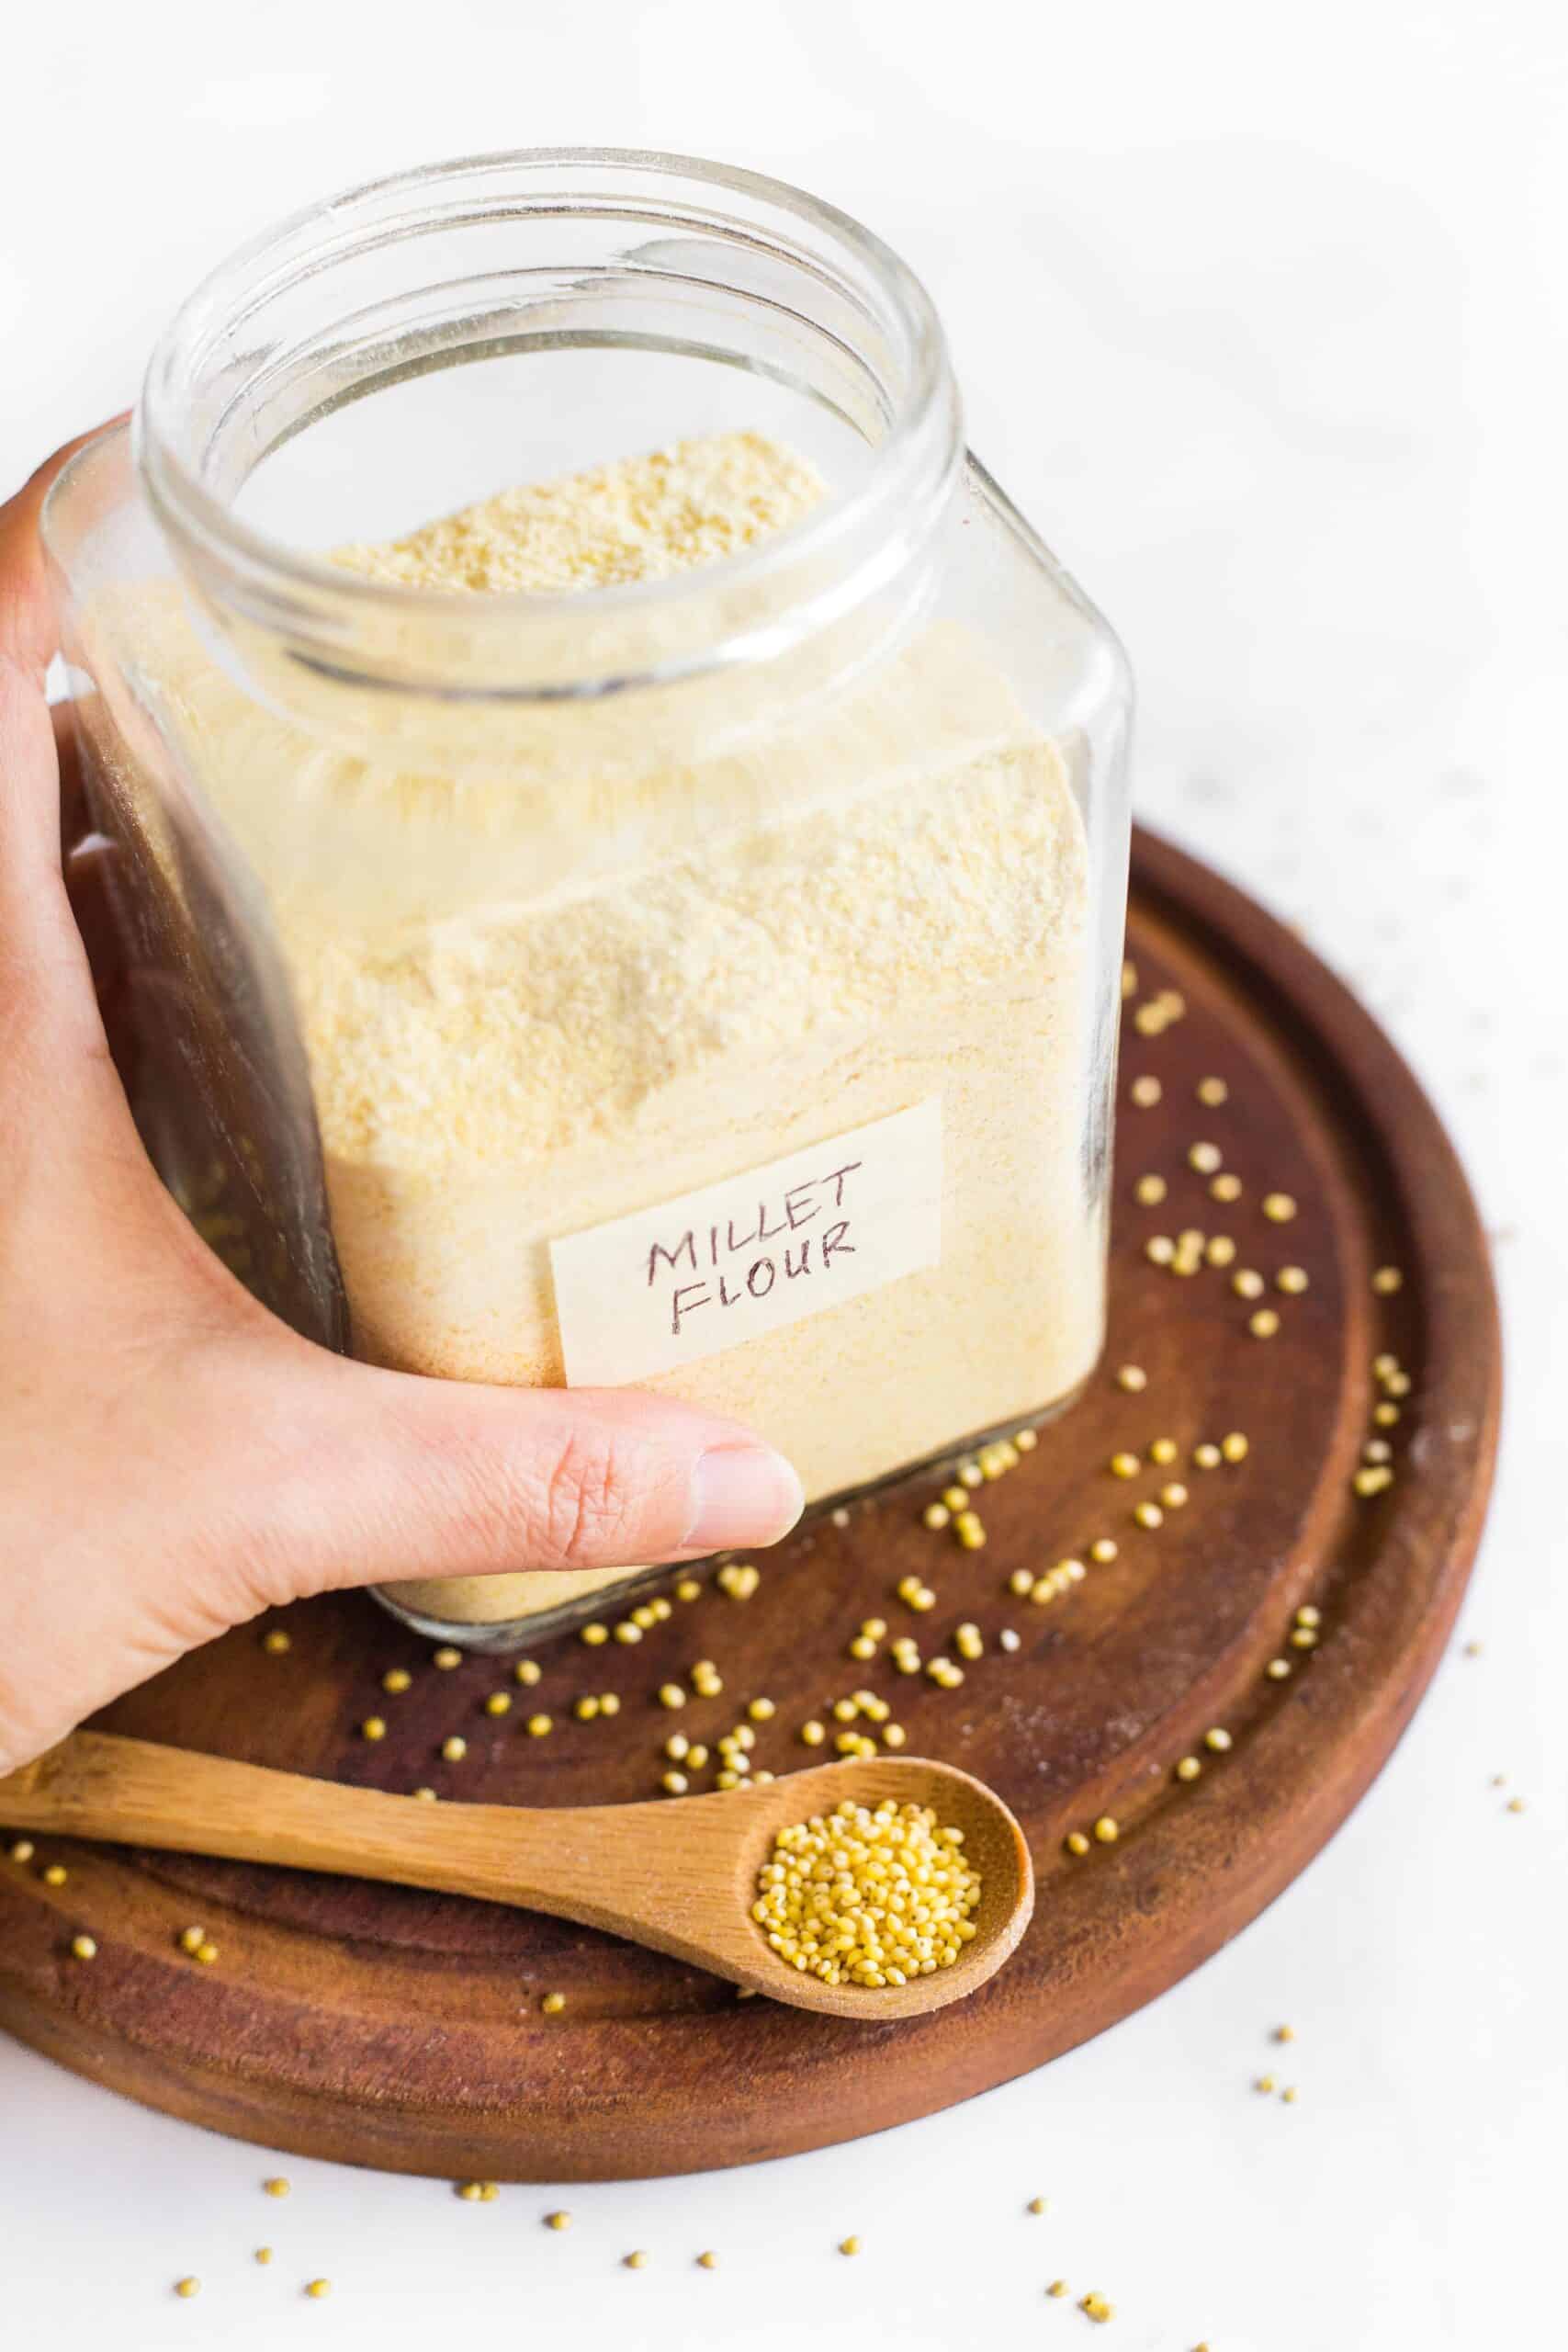 Holding a jar of homemade millet flour surrounded by millet seeds.